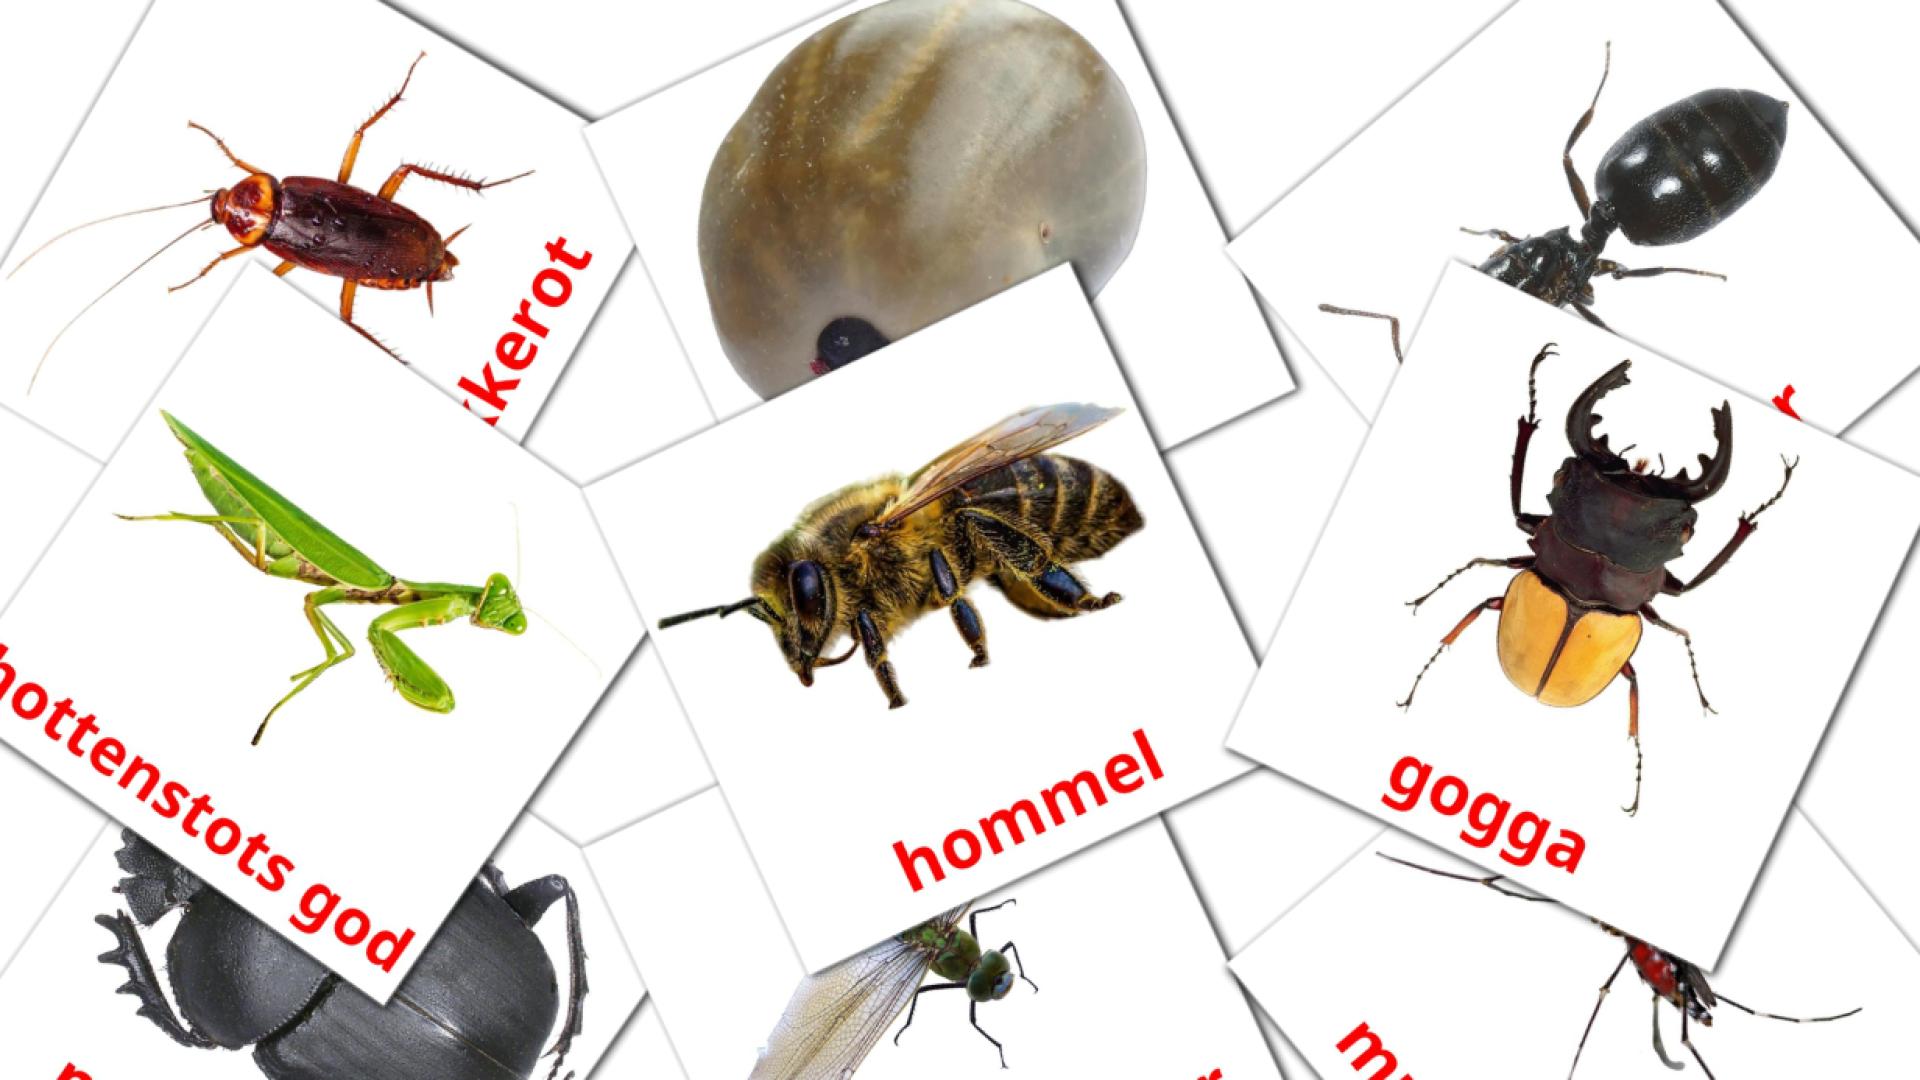 Insects - afrikaans vocabulary cards